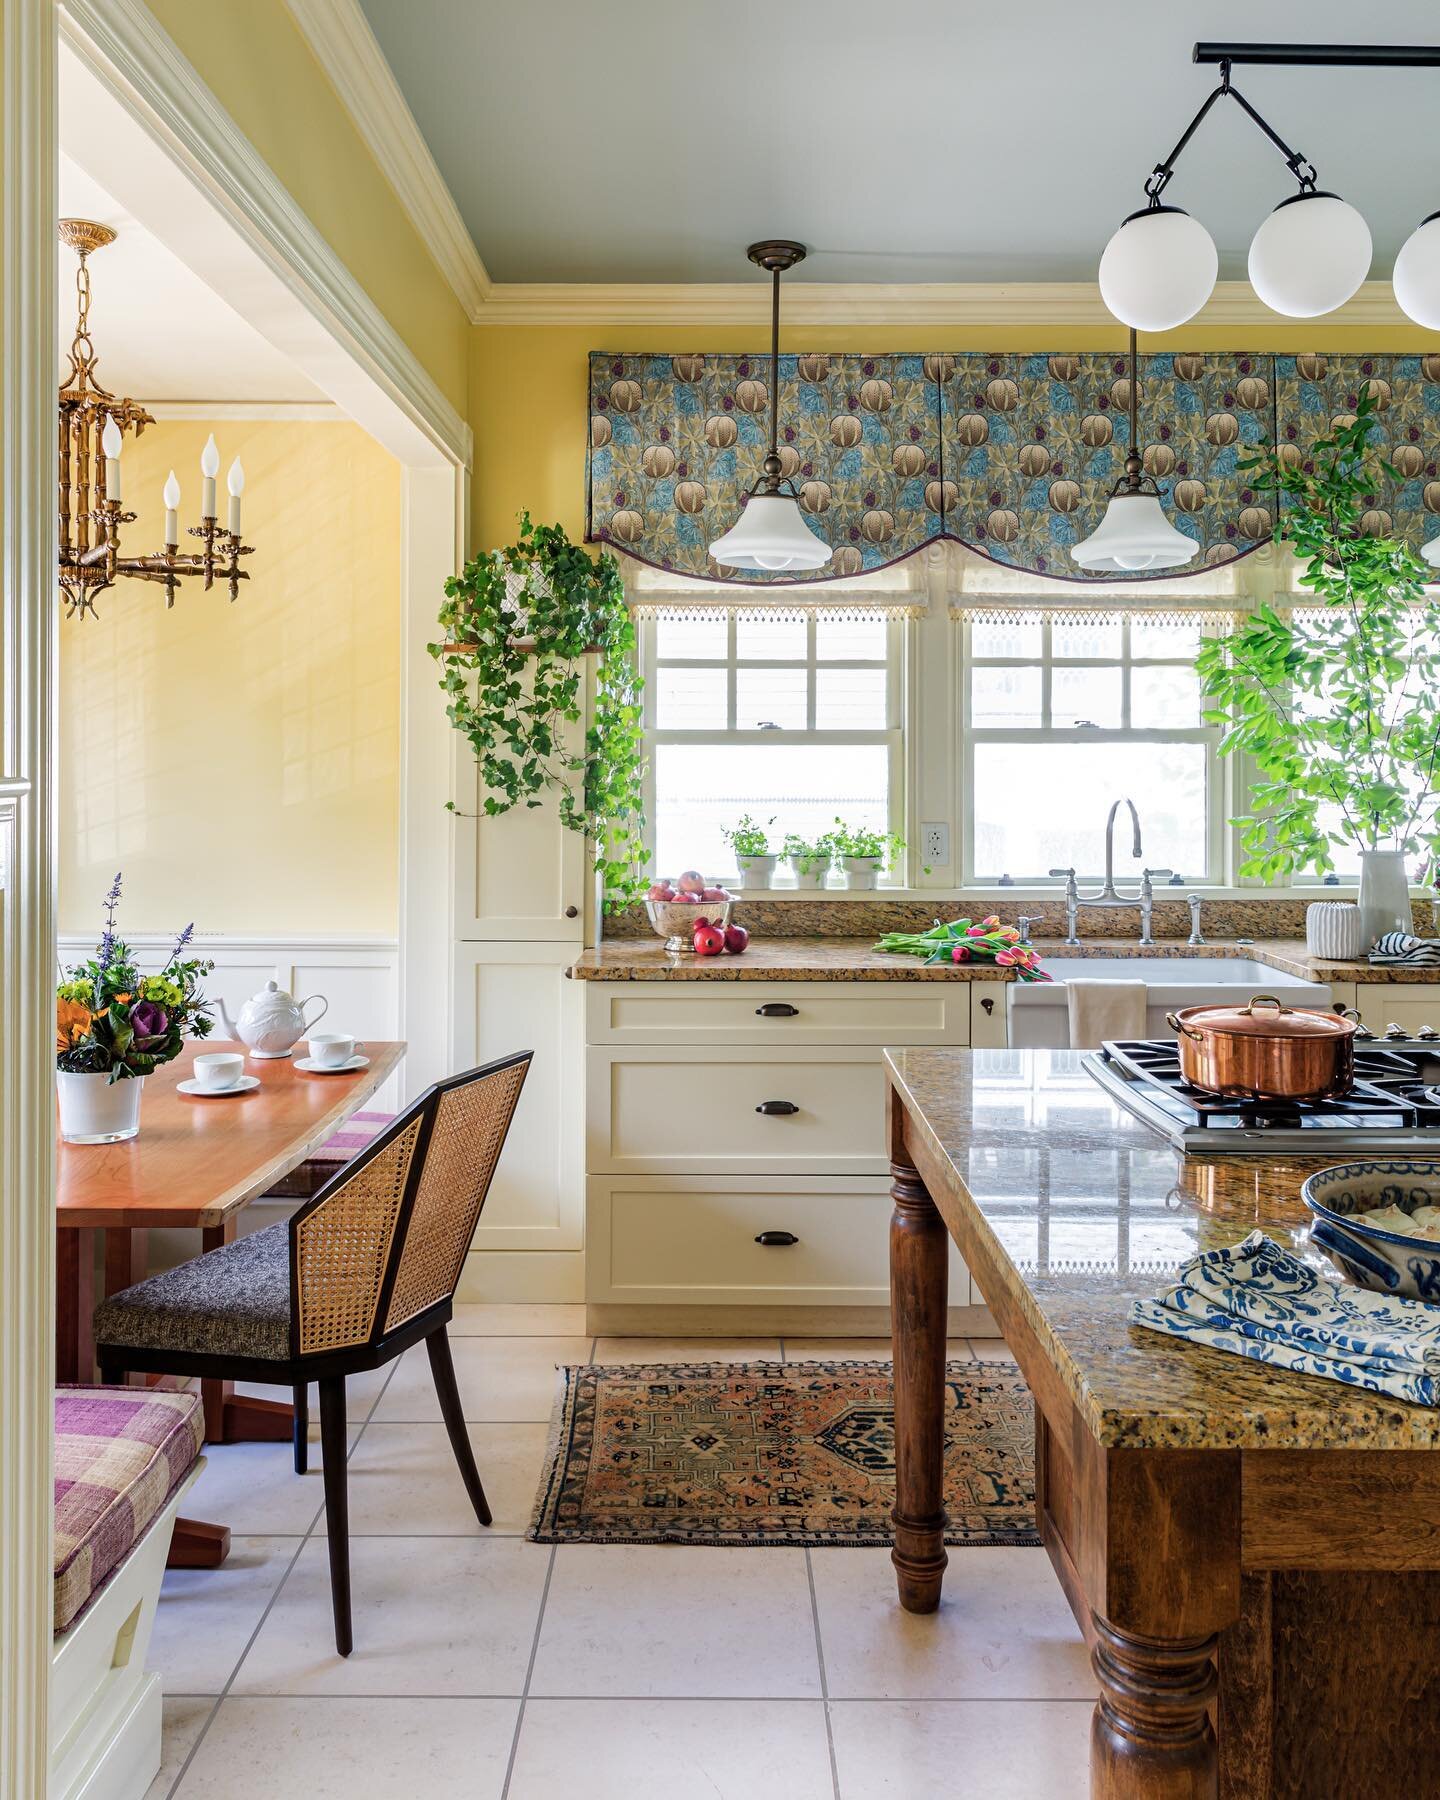 Austin says, &quot;The clients love to cook, so the range is centrally located on the large island, providing another stage of sorts for the creative homeowners to share their passions with guests encircling them while entertaining.&quot; In this roo